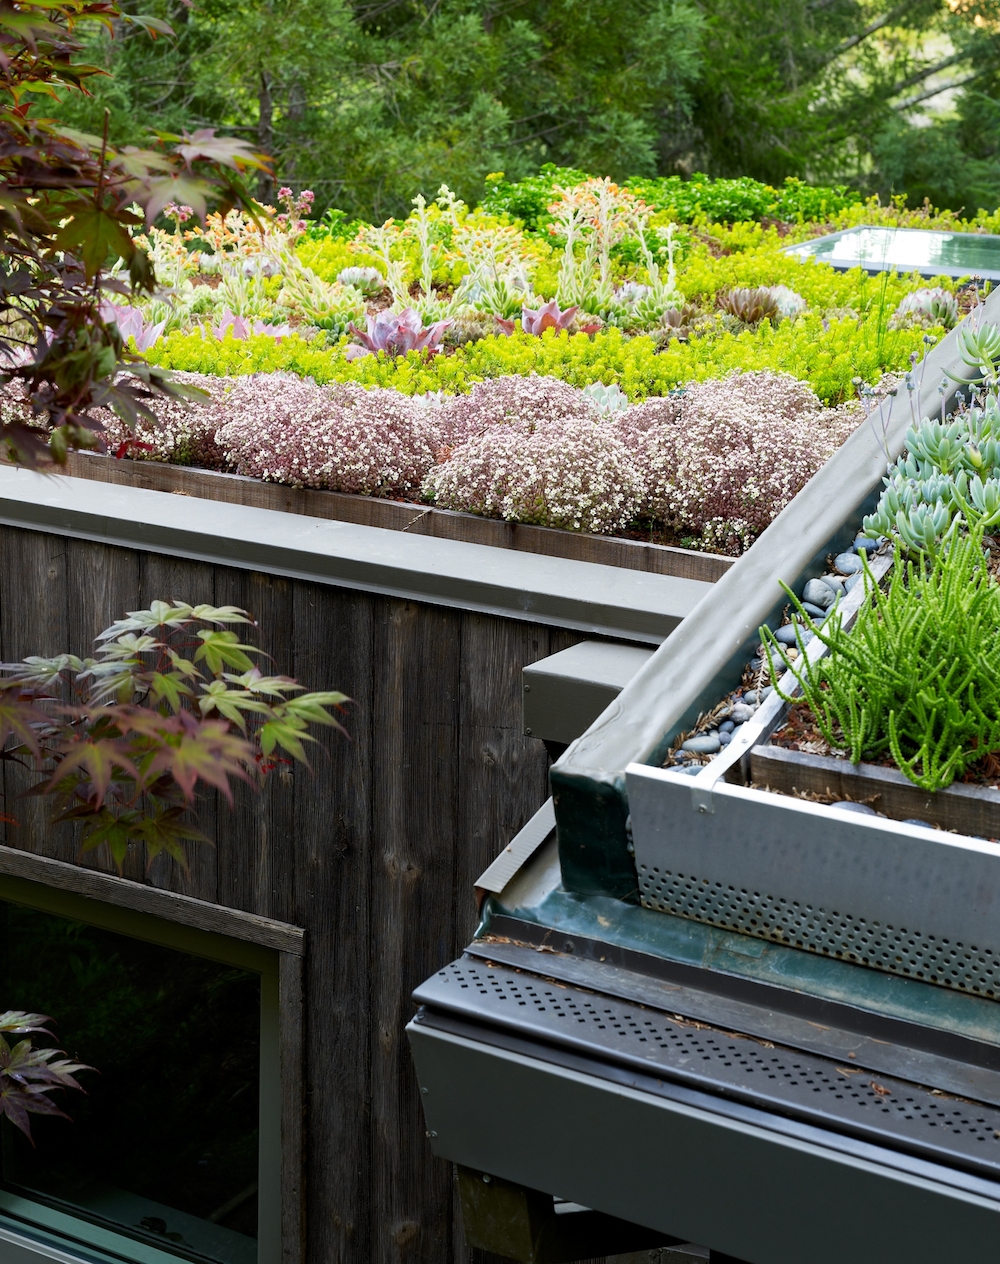 5 Examples of Living Green Roofs – Grass Turf and Succulent Sedums